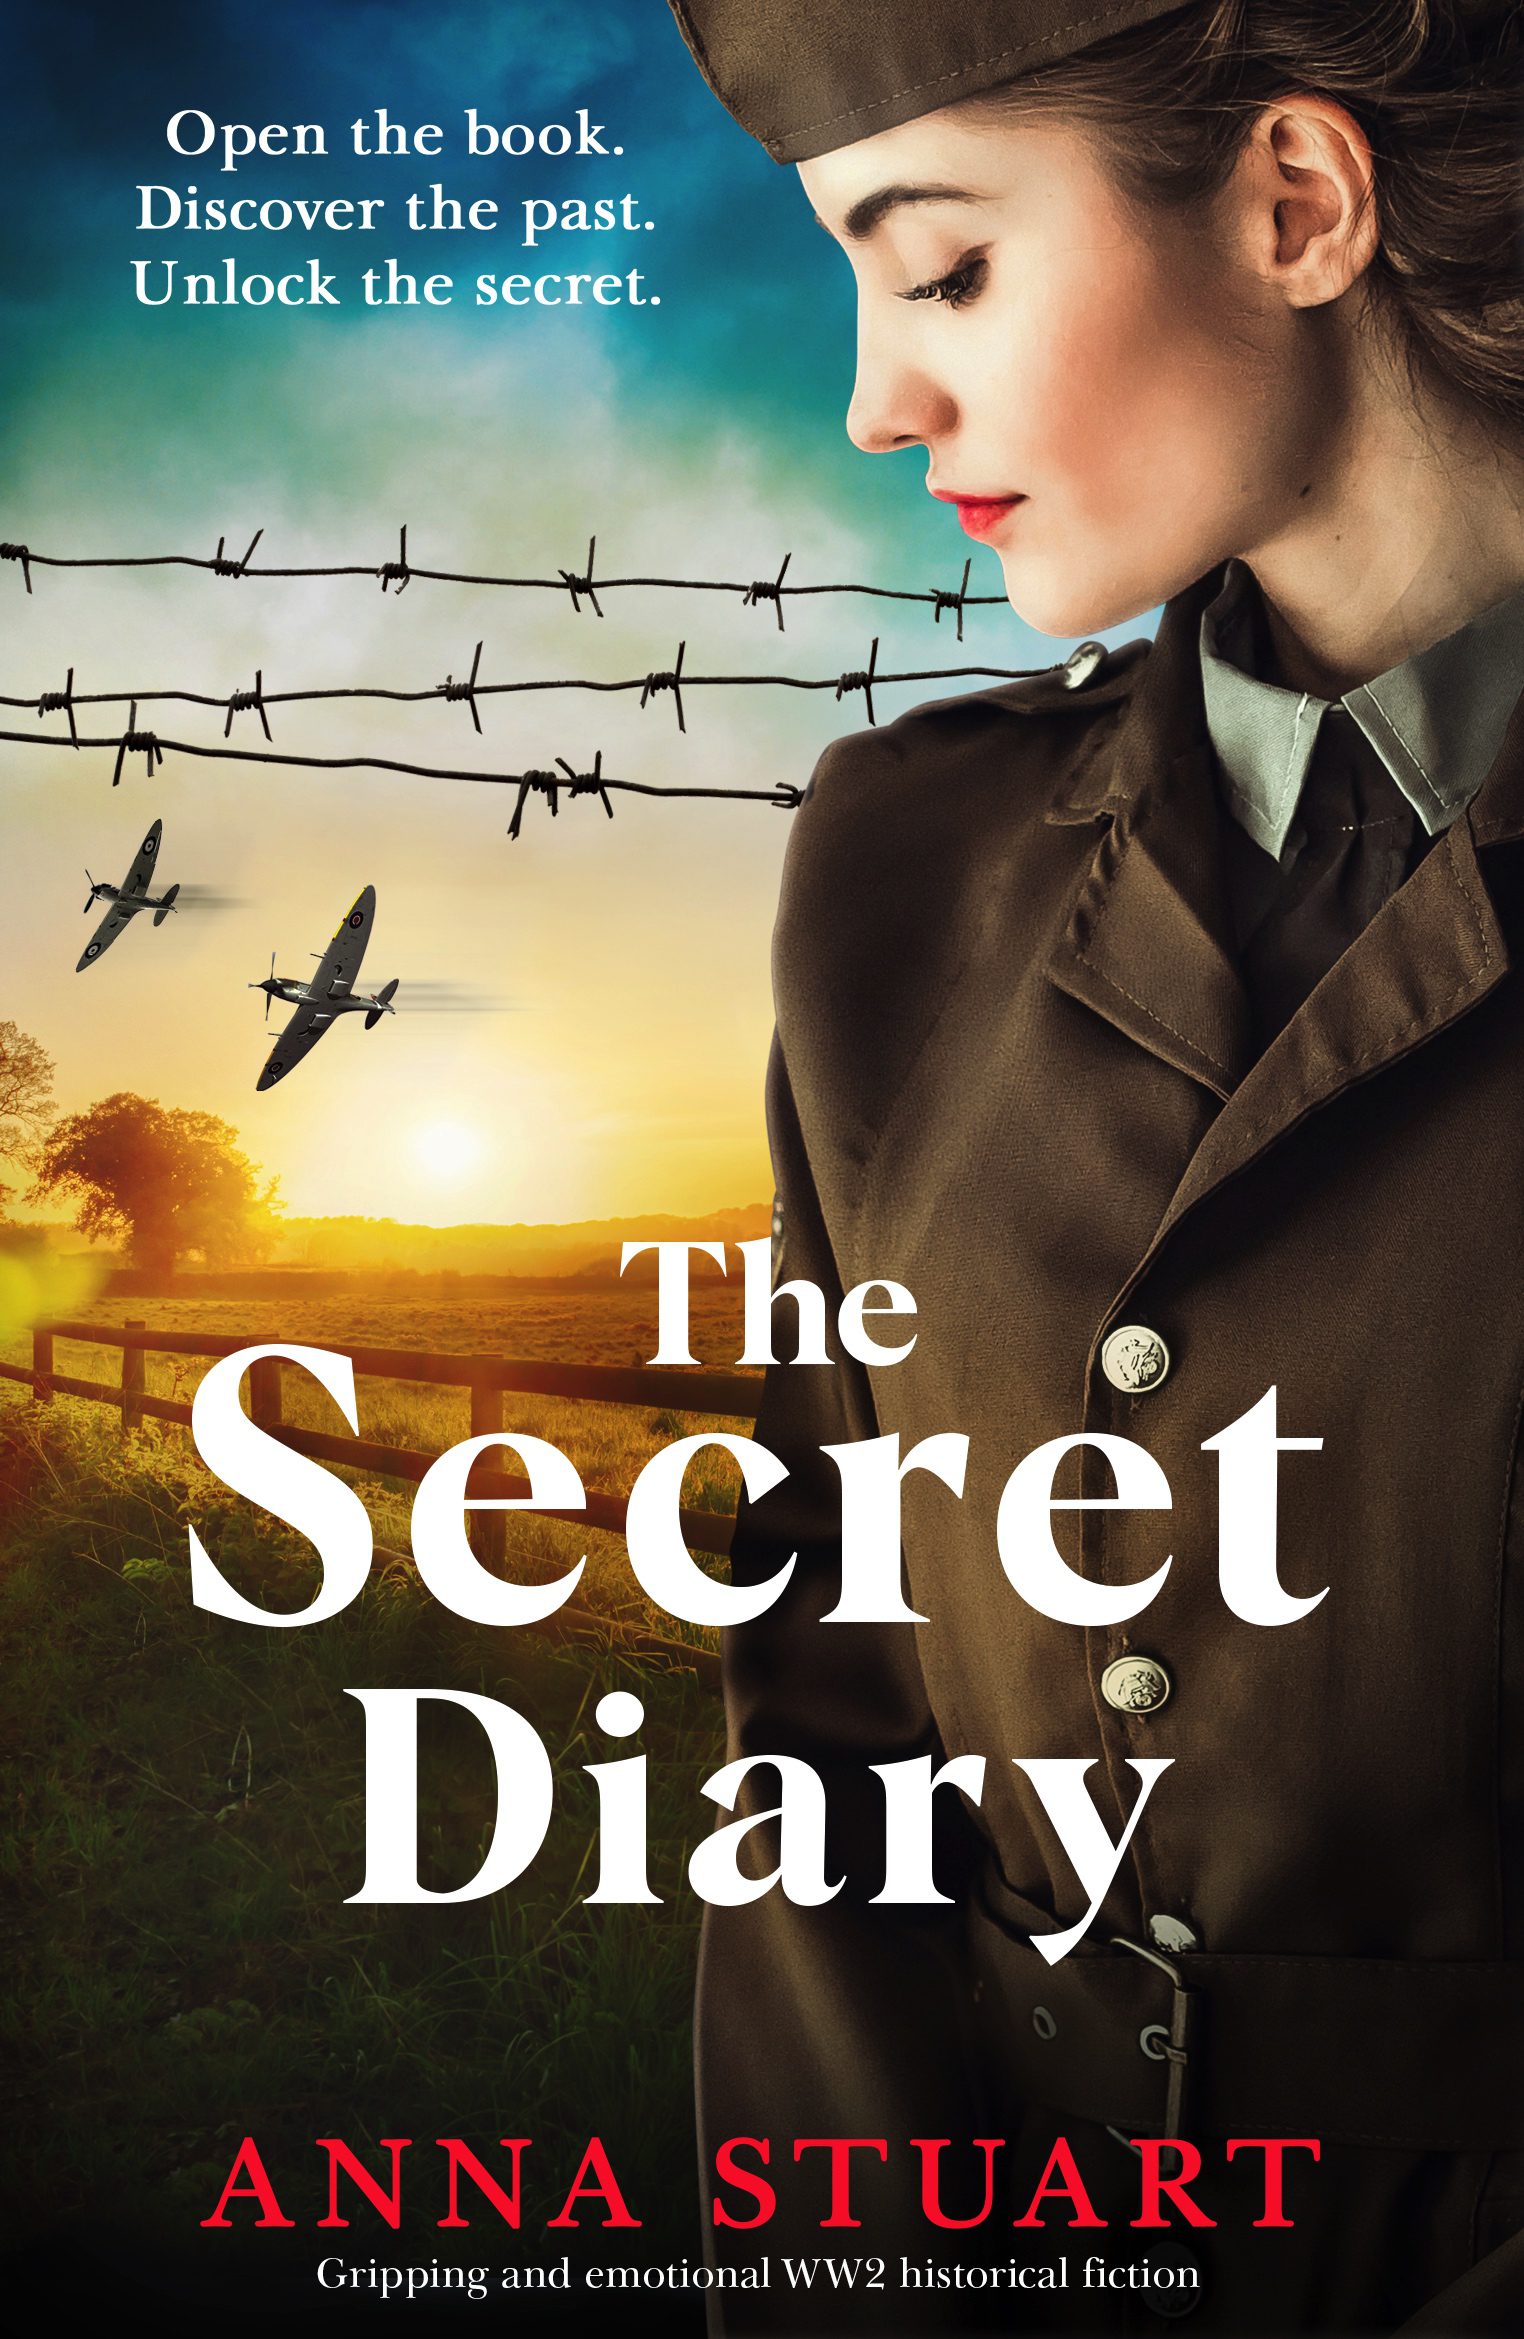 The Secret Diary book cover